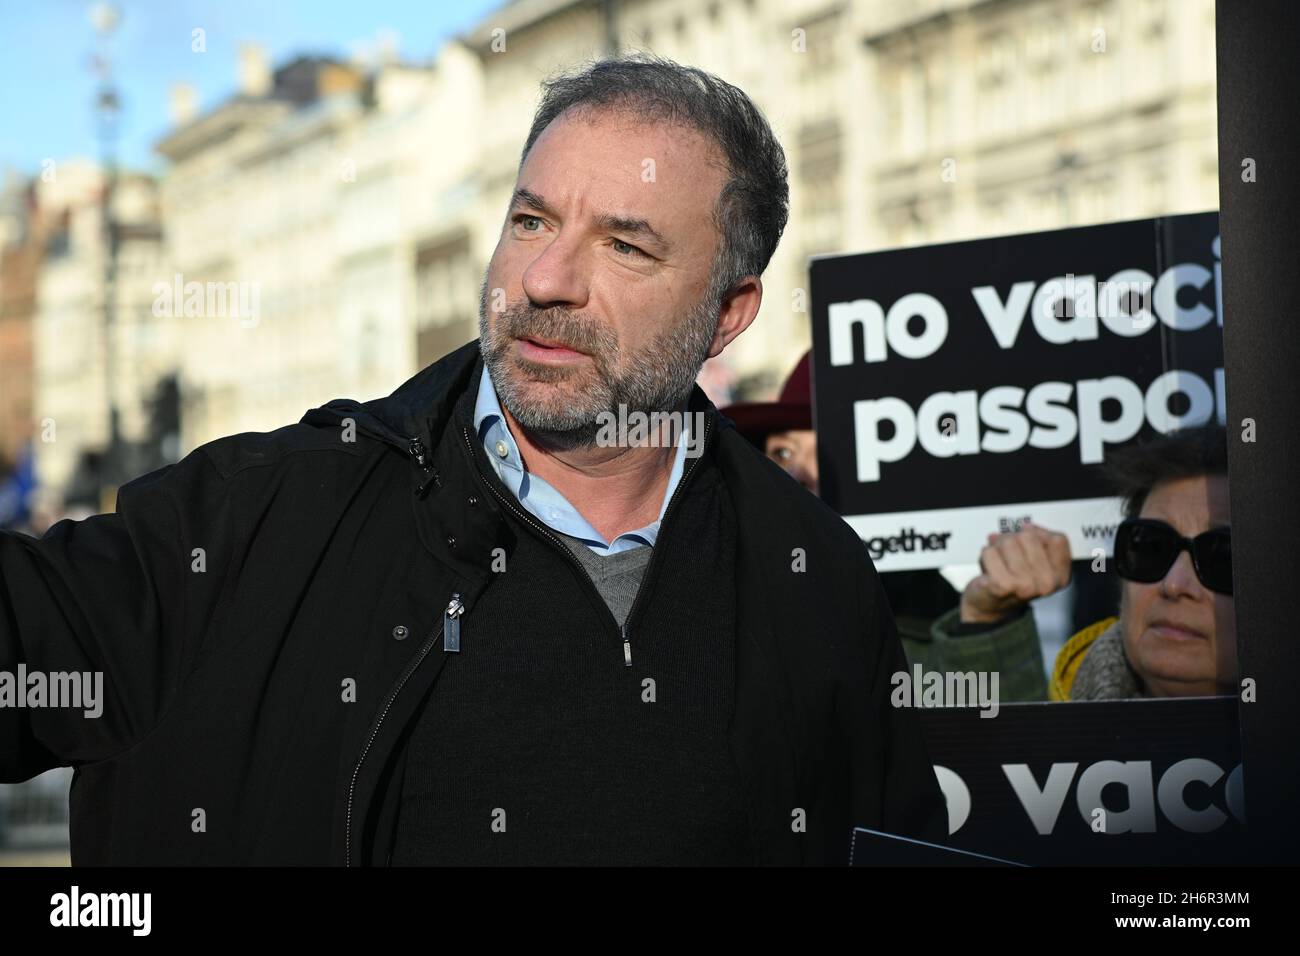 London, UK. 17 November 2021, Alan D Miller support people should have Freedom of Choice against Vaccine Passports - No jab, no job, No jab, no travel is totall wrong against fundamental human rights in Parliament Square, 17 November 2021, London, UK. Stock Photo